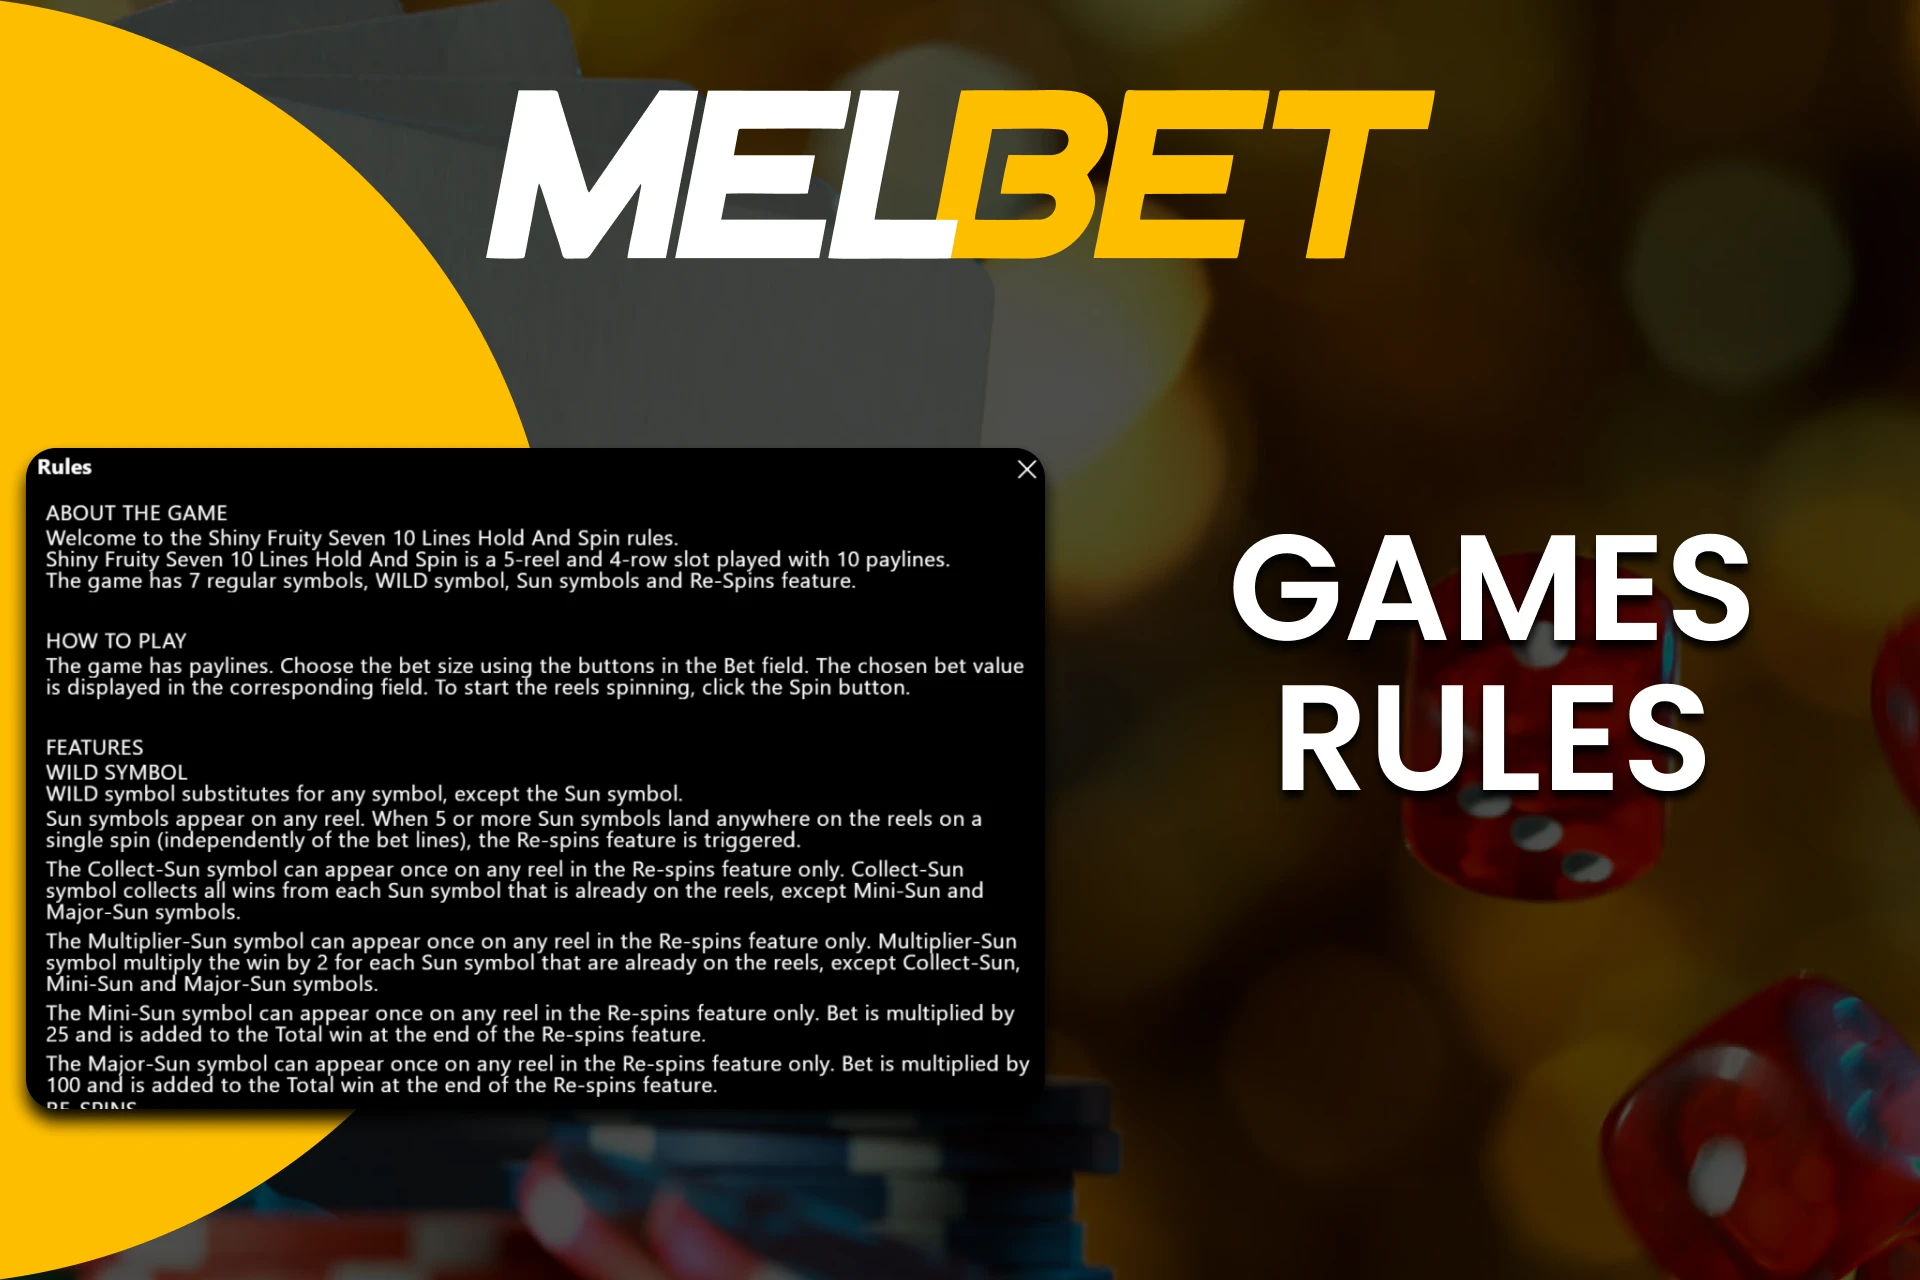 Find out about the rules of playing Jackpot on Melbet.